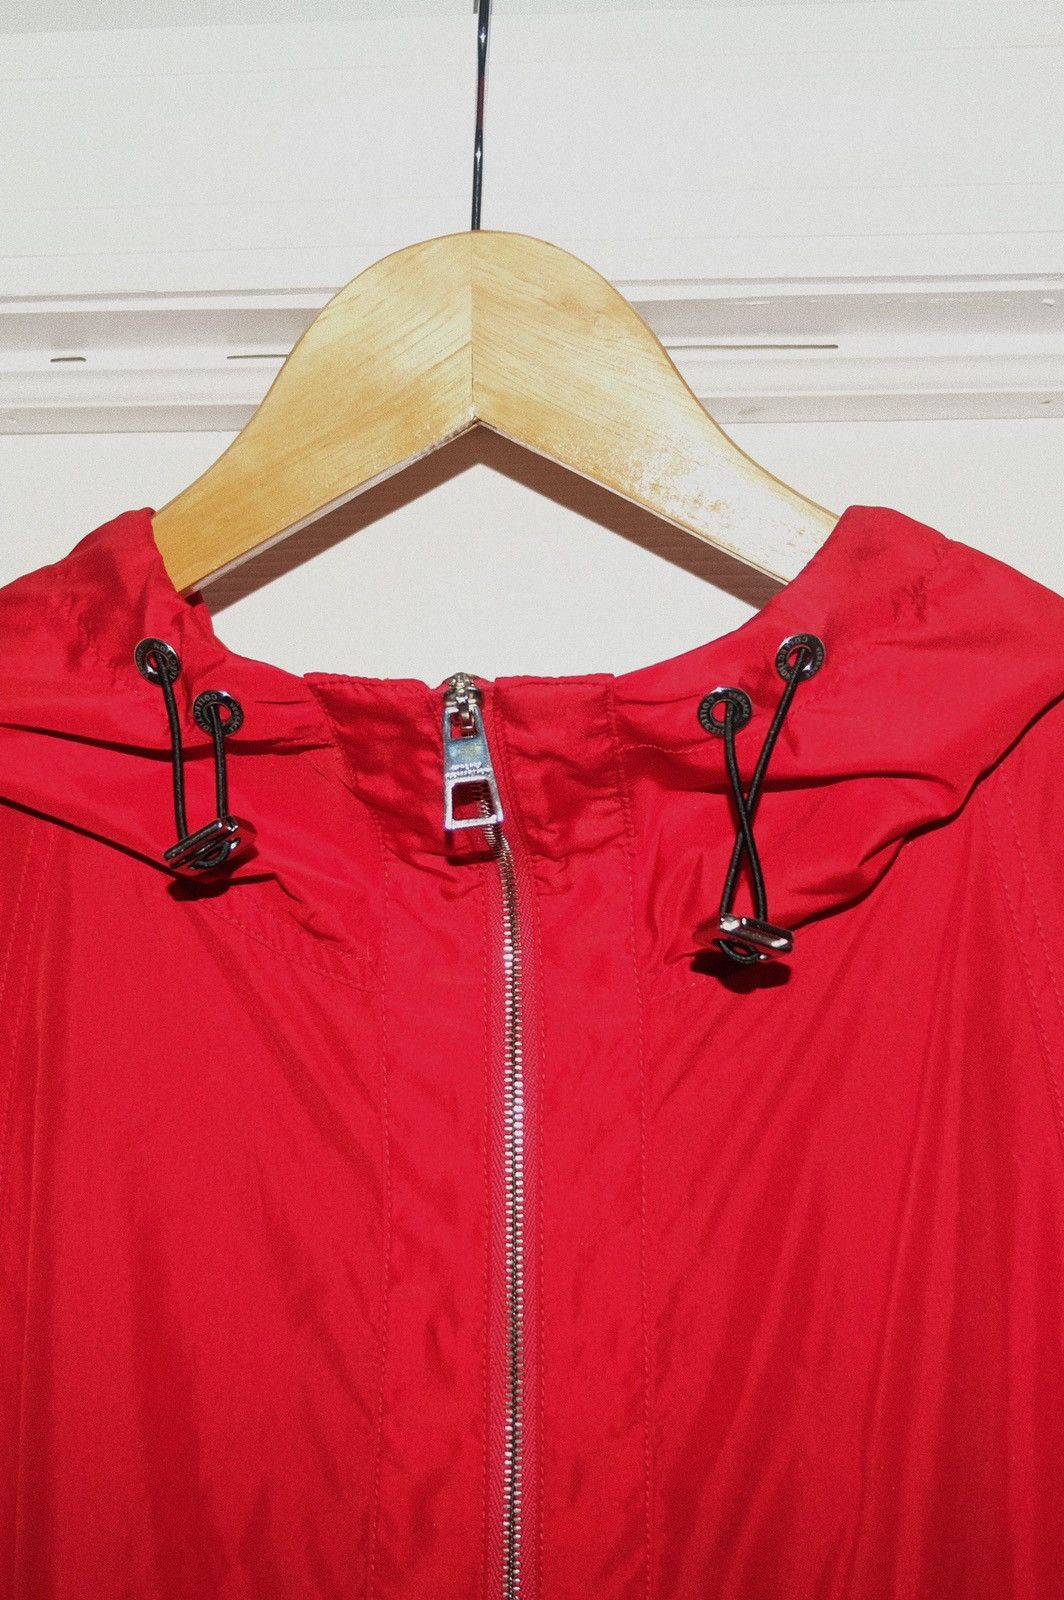 Versace Hooded Red Versace Poncho Size US M / EU 48-50 / 2 - 2 Preview